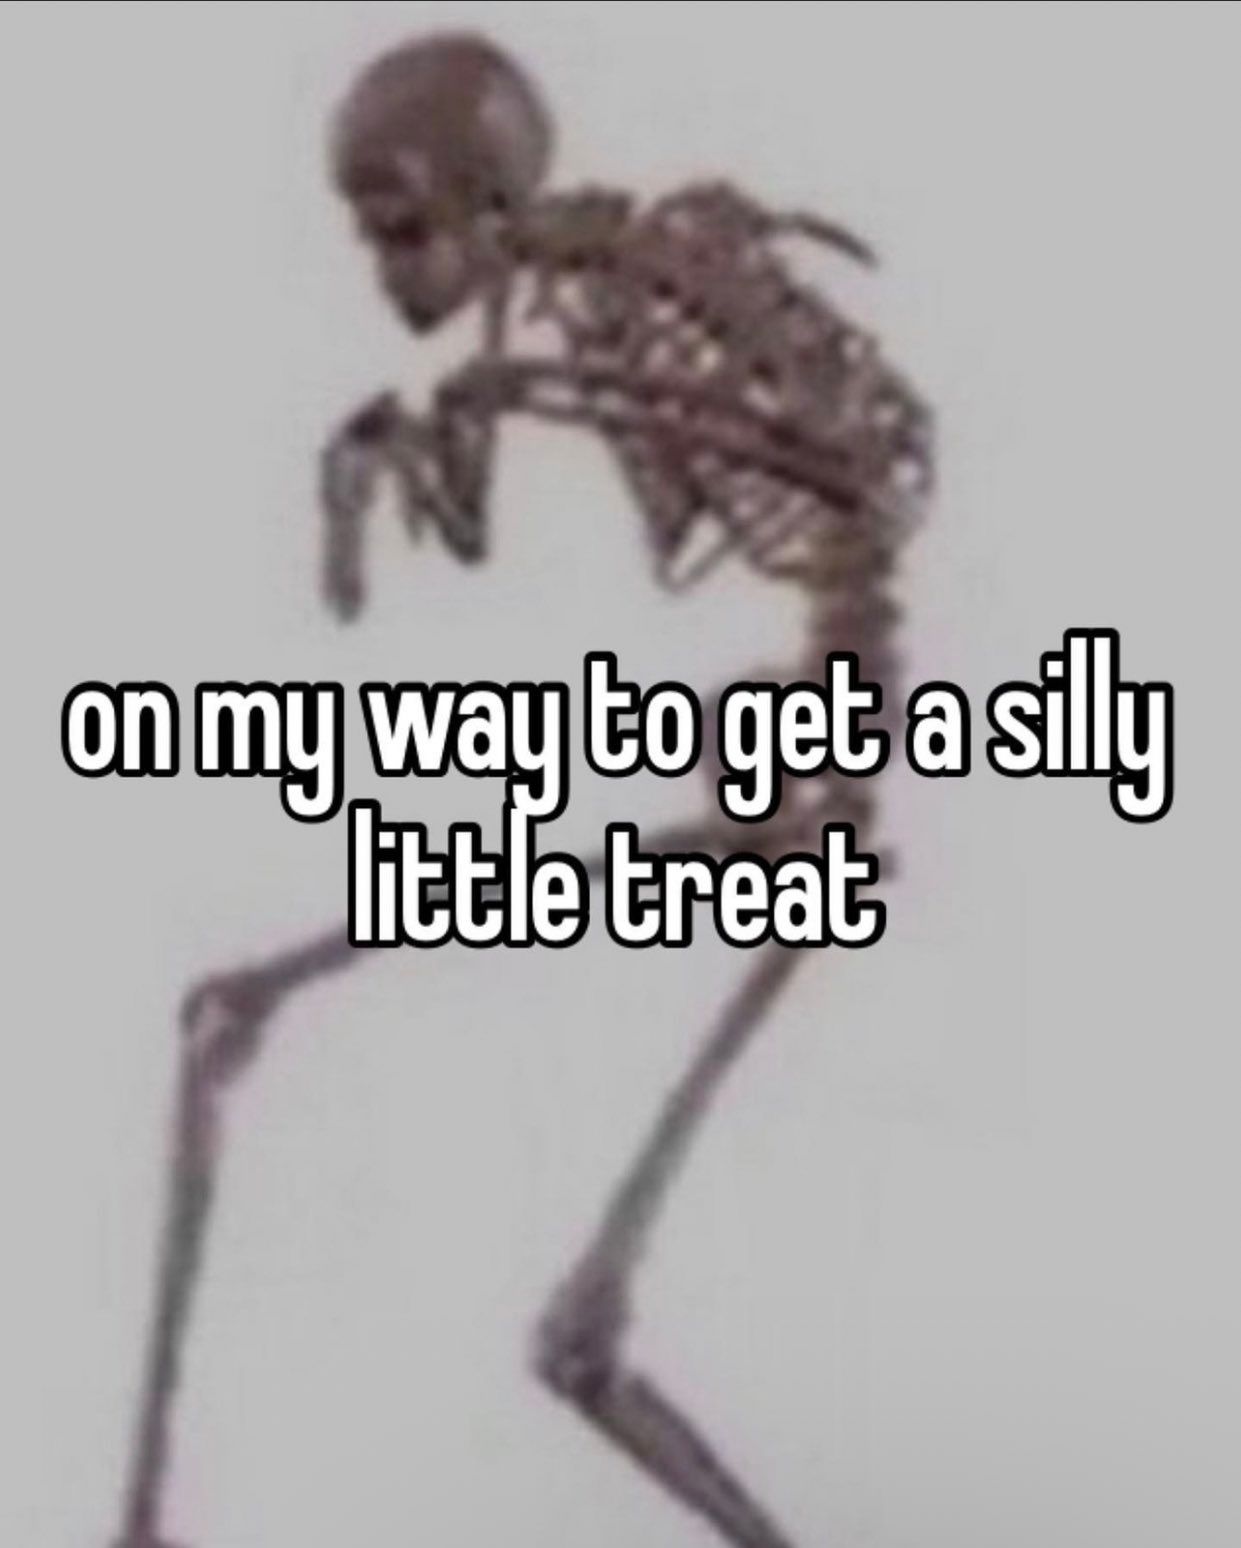 A creeping skeleton with the caption "on my way to get a silly little treat"